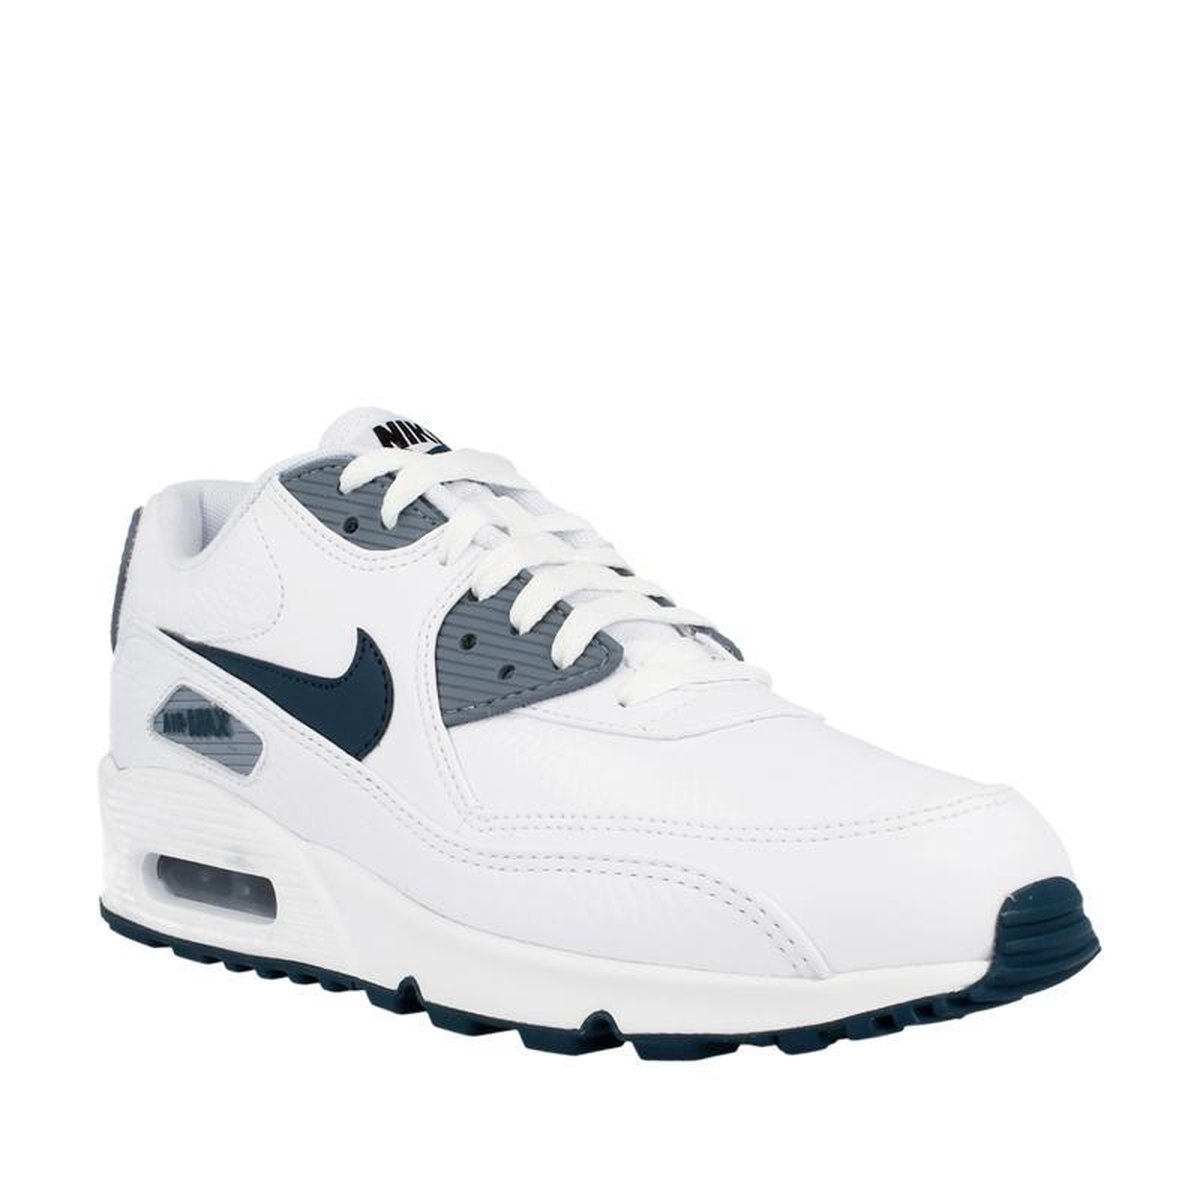 Nike AIR MAX 90 LTR White Space Blue/ Magnet Grey Leather 652980 101  Wit;Grijs maat 41 | bol.com